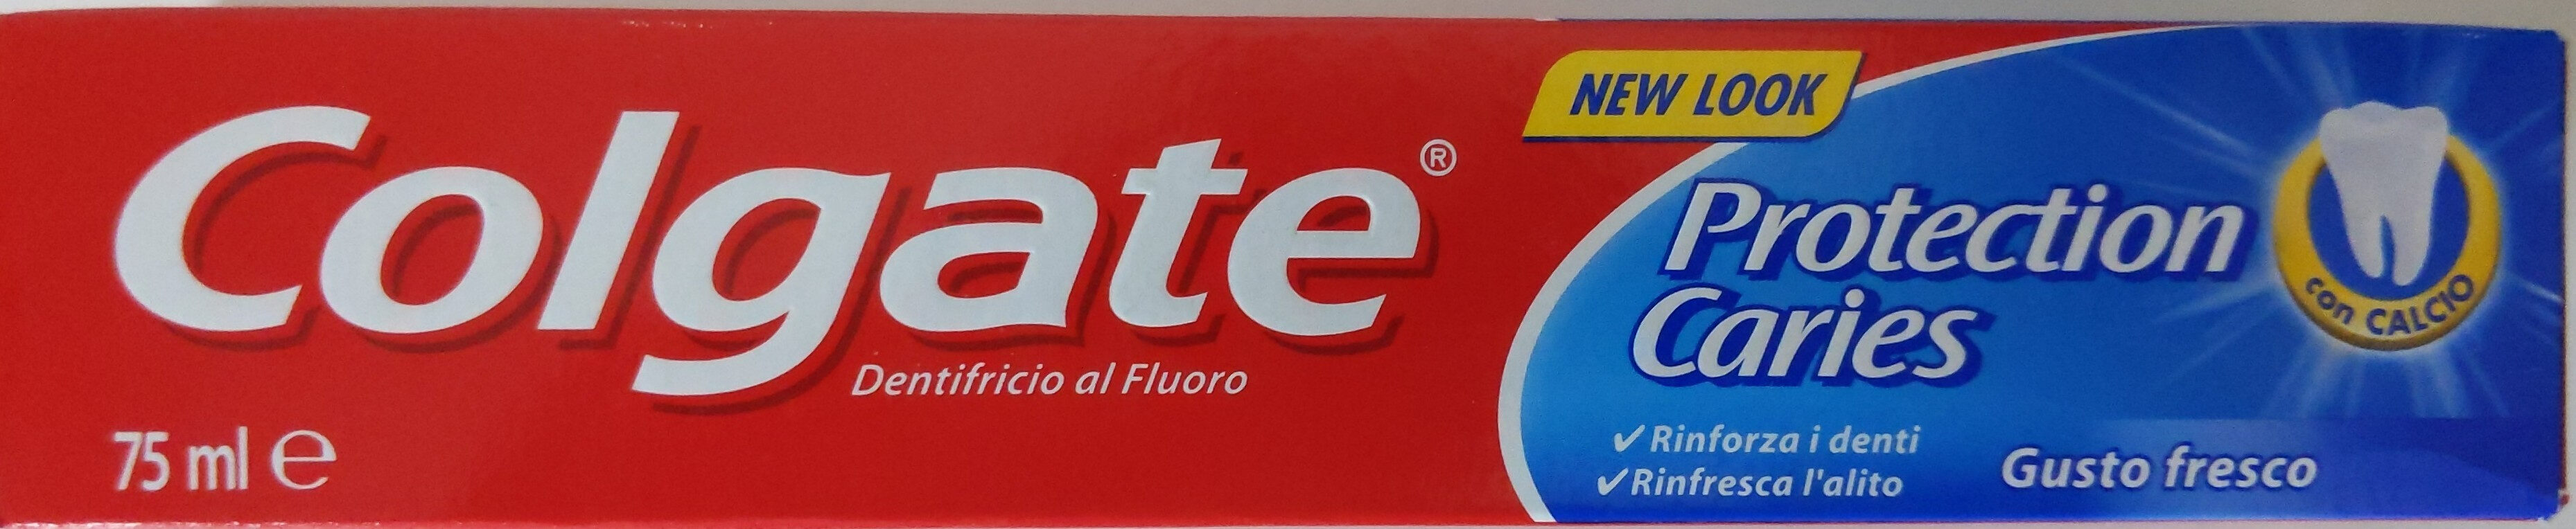 Colgate Protection Caries - Tuote - it